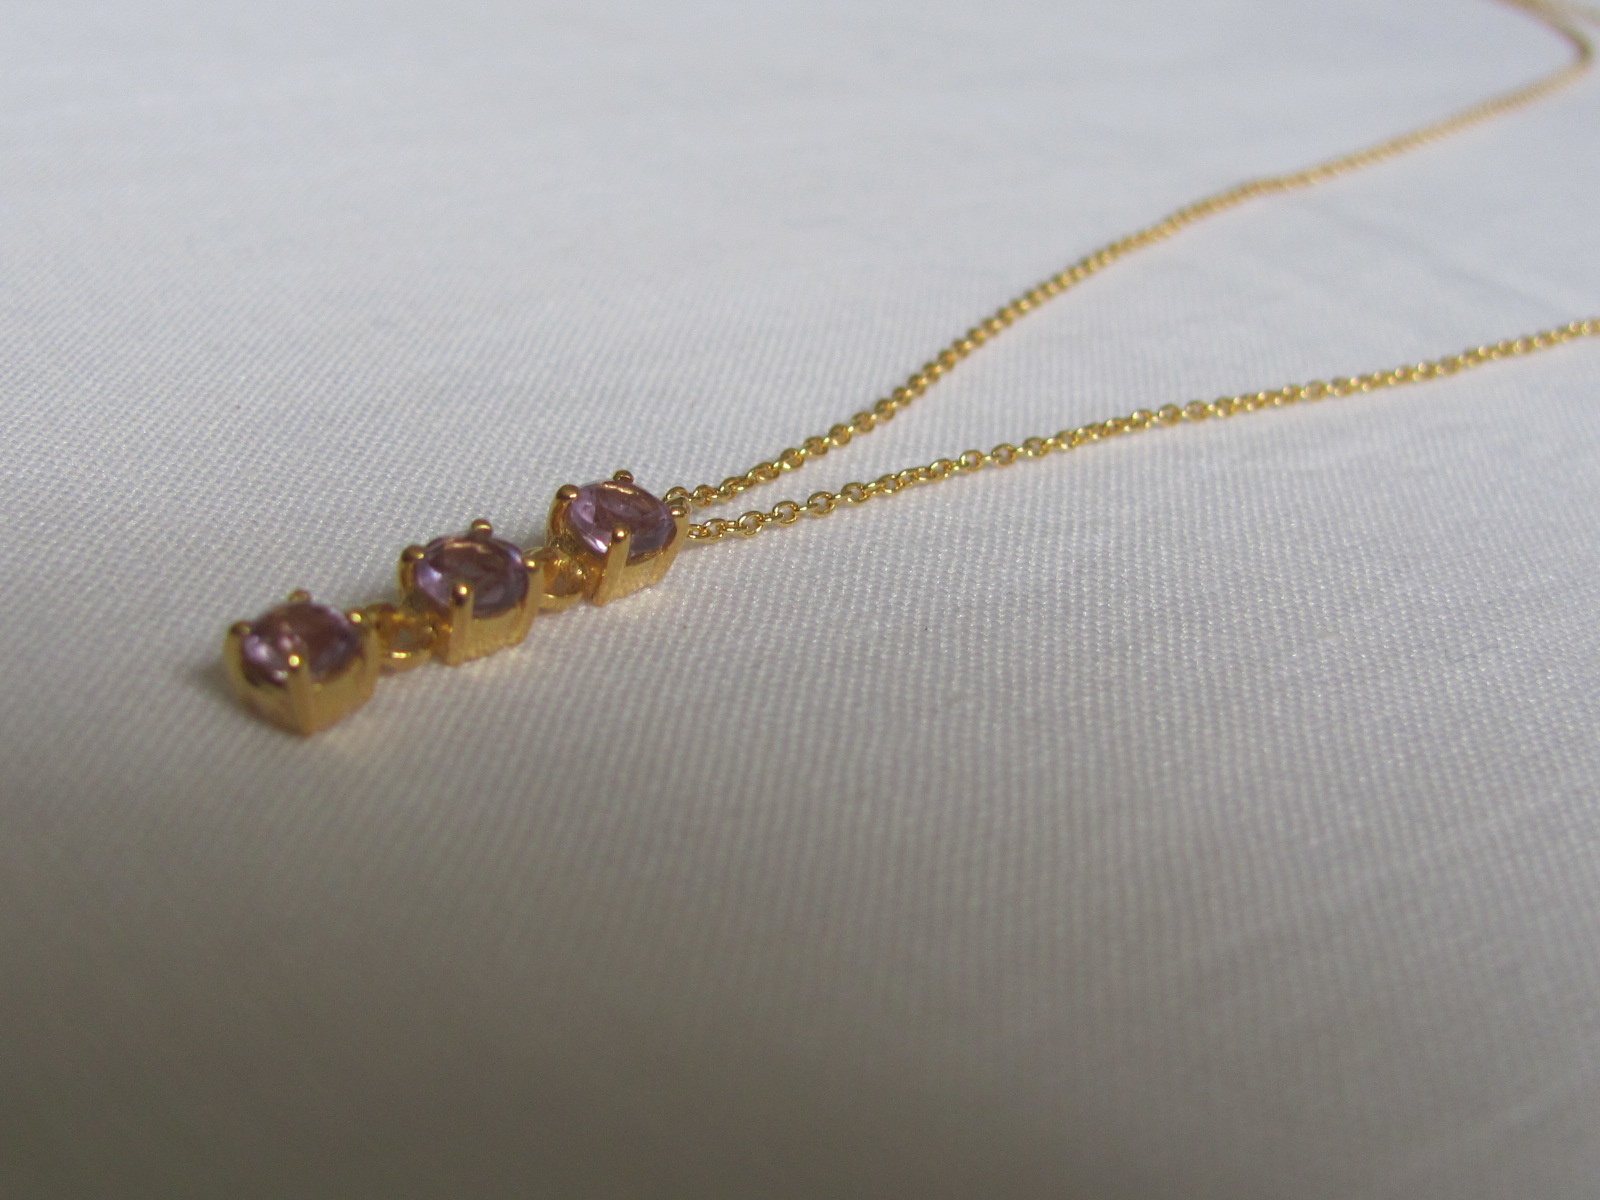 Necklace gold on silver with amethyst